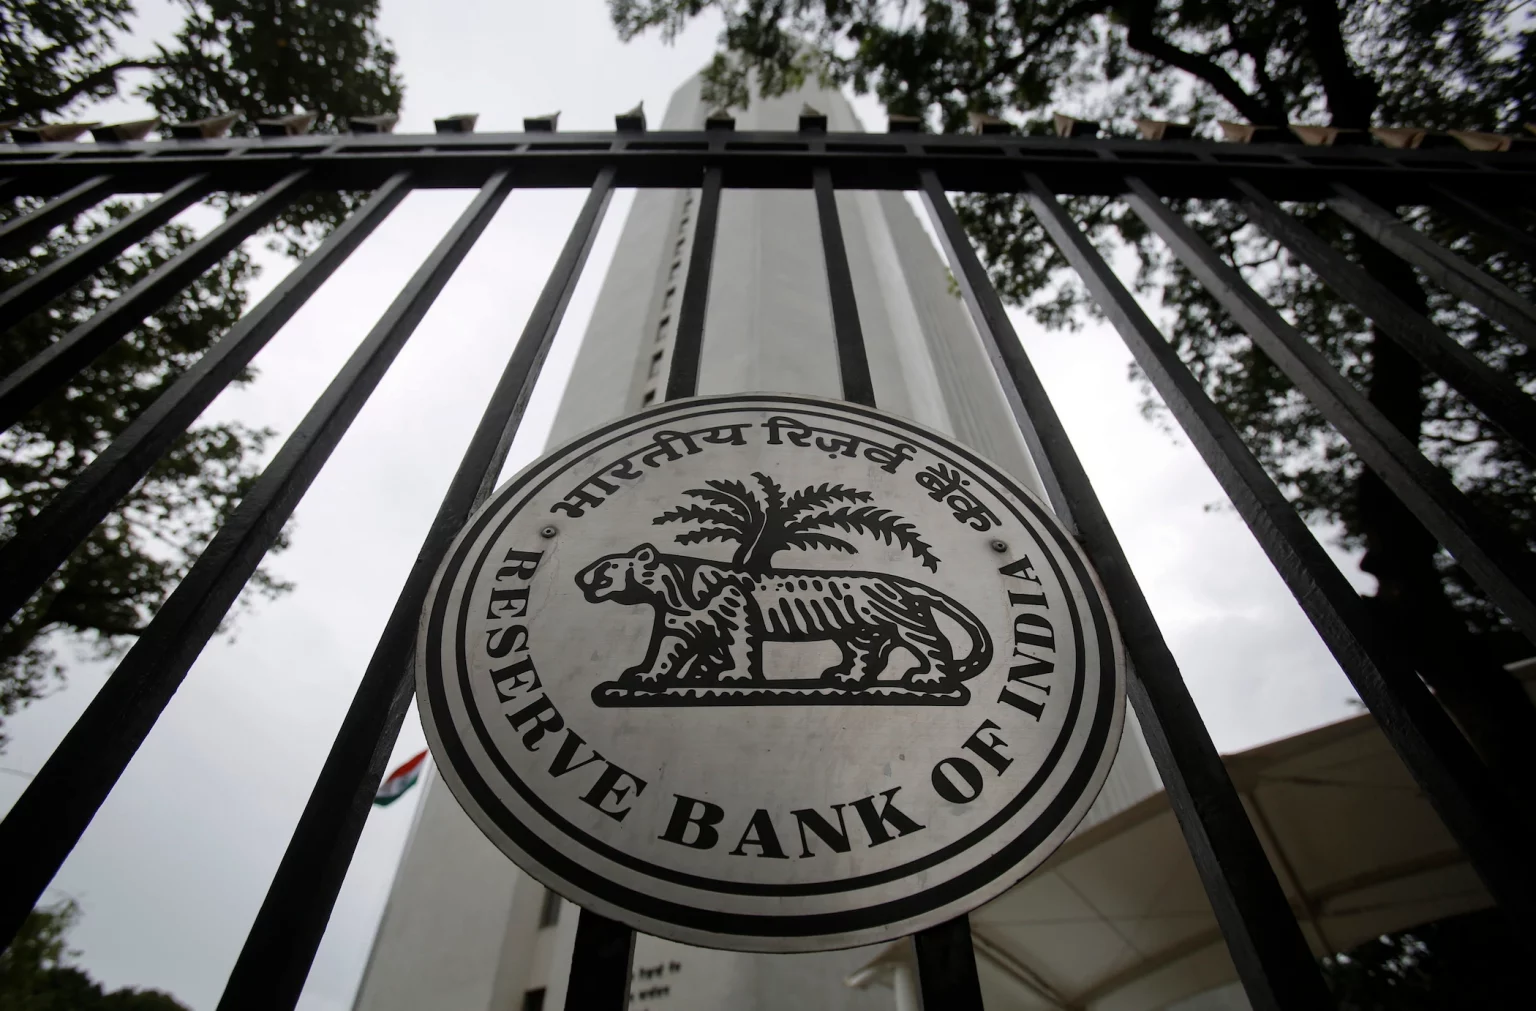 India’s central bank launches UPI Lite with eight banks to make sub $2.50 transactions faster and simpler on the country’s most popular digital payments network (Manish Singh/TechCrunch)